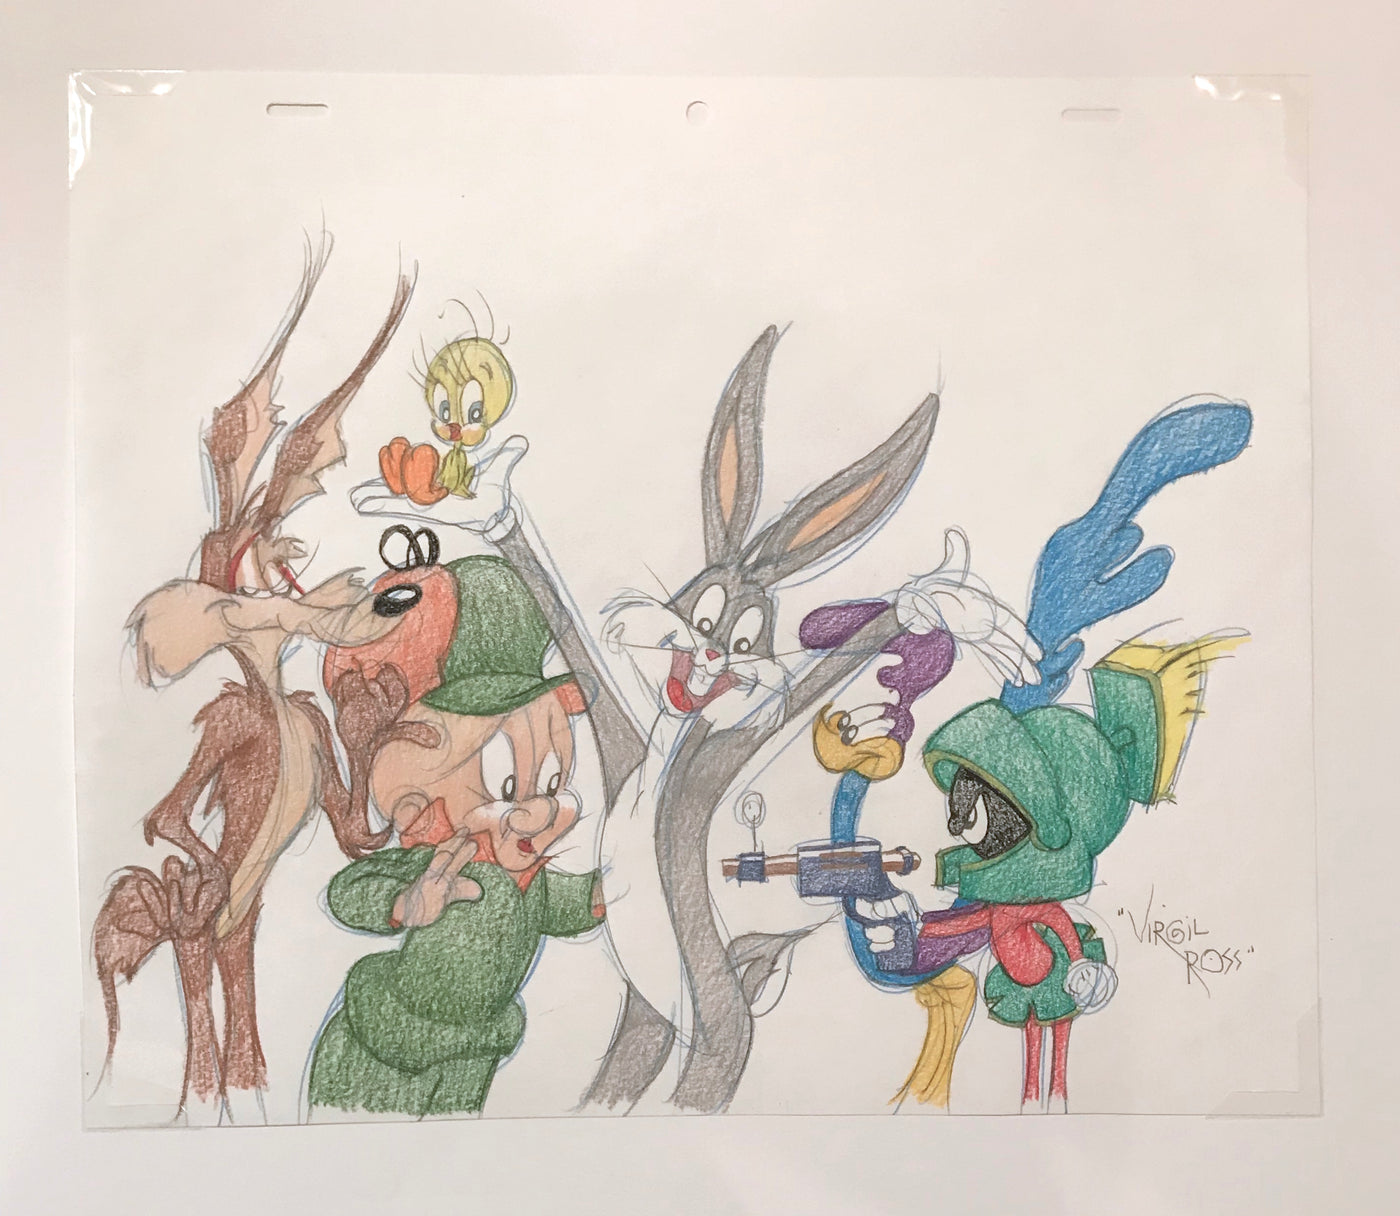 Warner Brothers Virgil Ross Animation Drawing of Wile E. Coyote, Elmer Fudd, Tweety, Bugs Bunny, Roadrunner, and Marvin the Martian